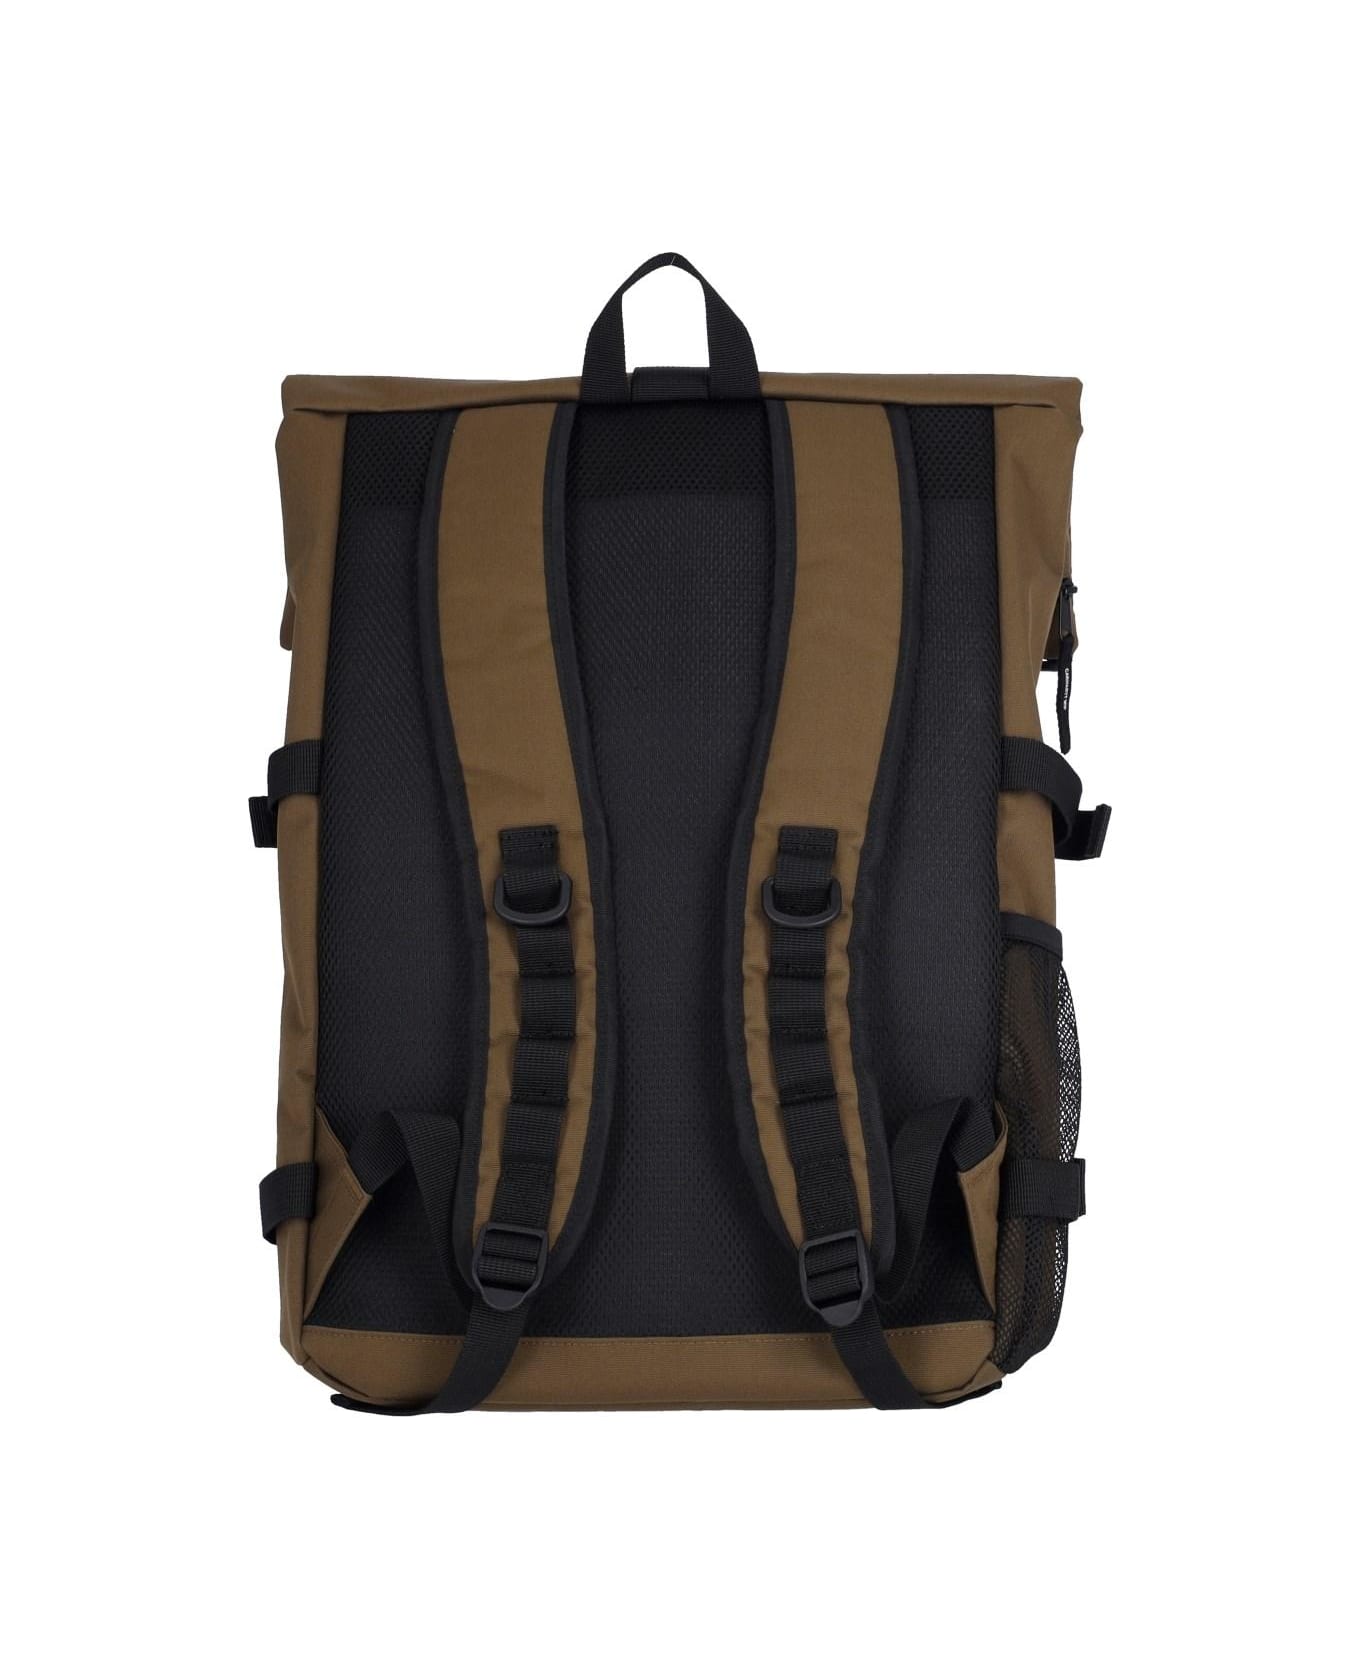 Carhartt 'philis' Backpack - BROWN バックパック